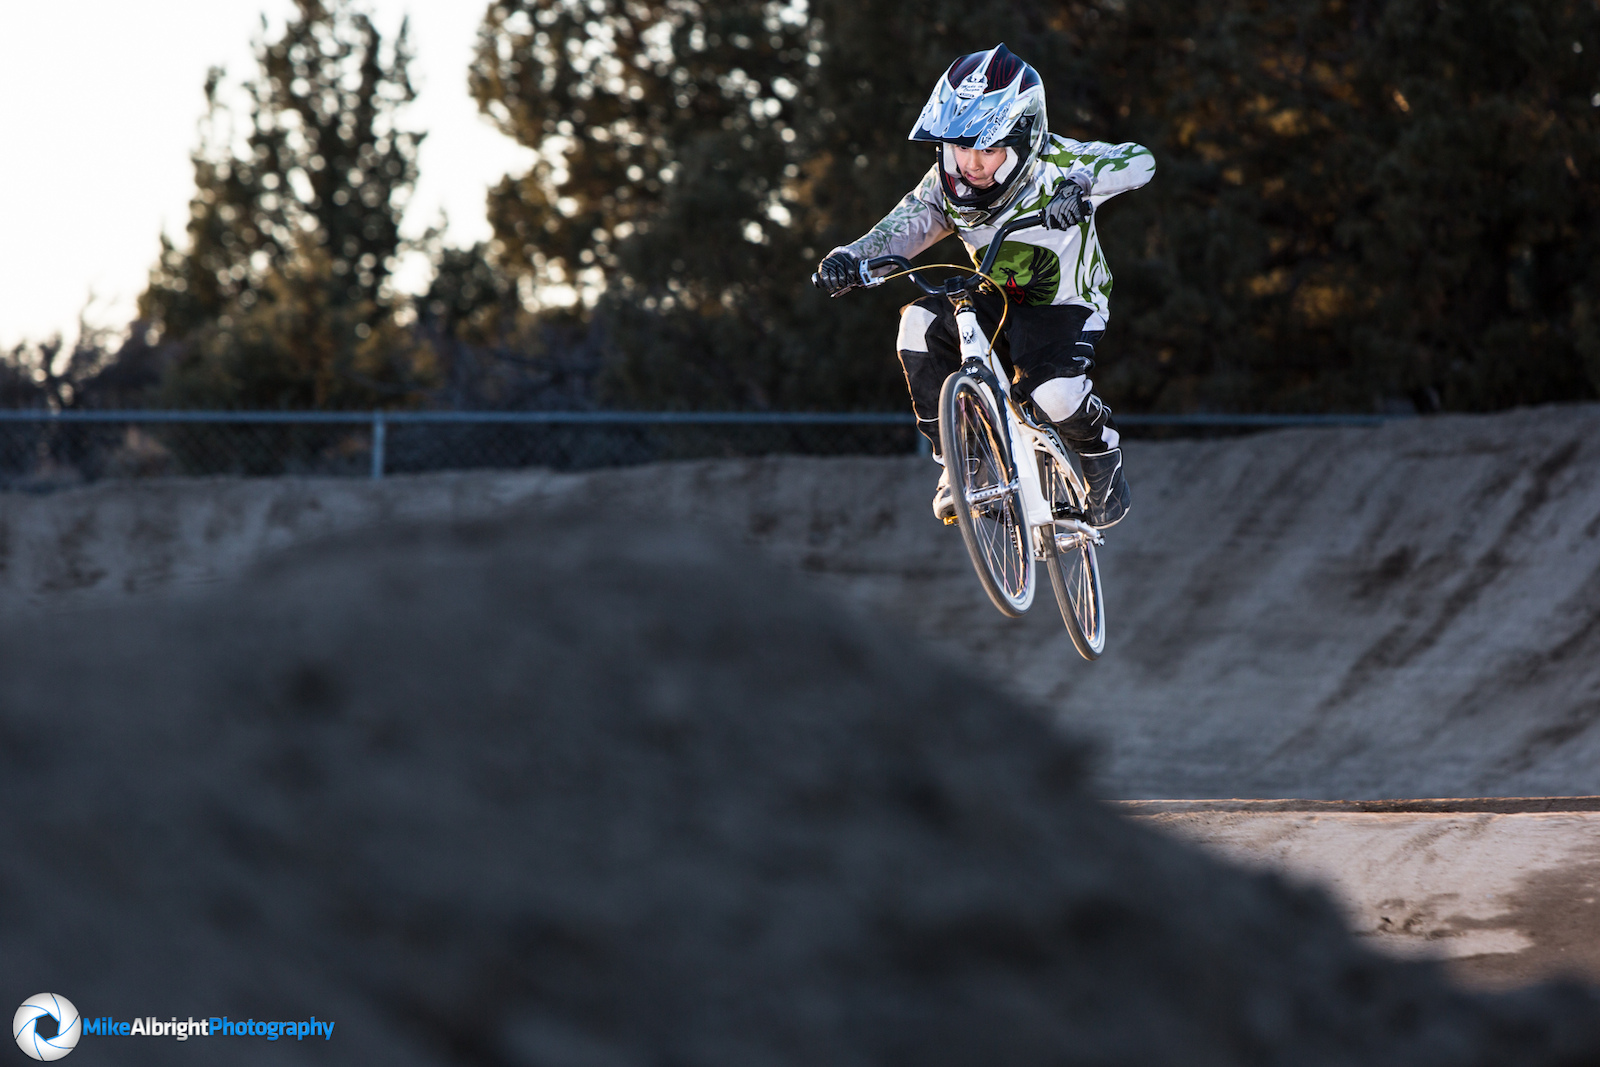 Banyan Howell tries out the newly remodeled High Desert BMX track in Bend, Oregon